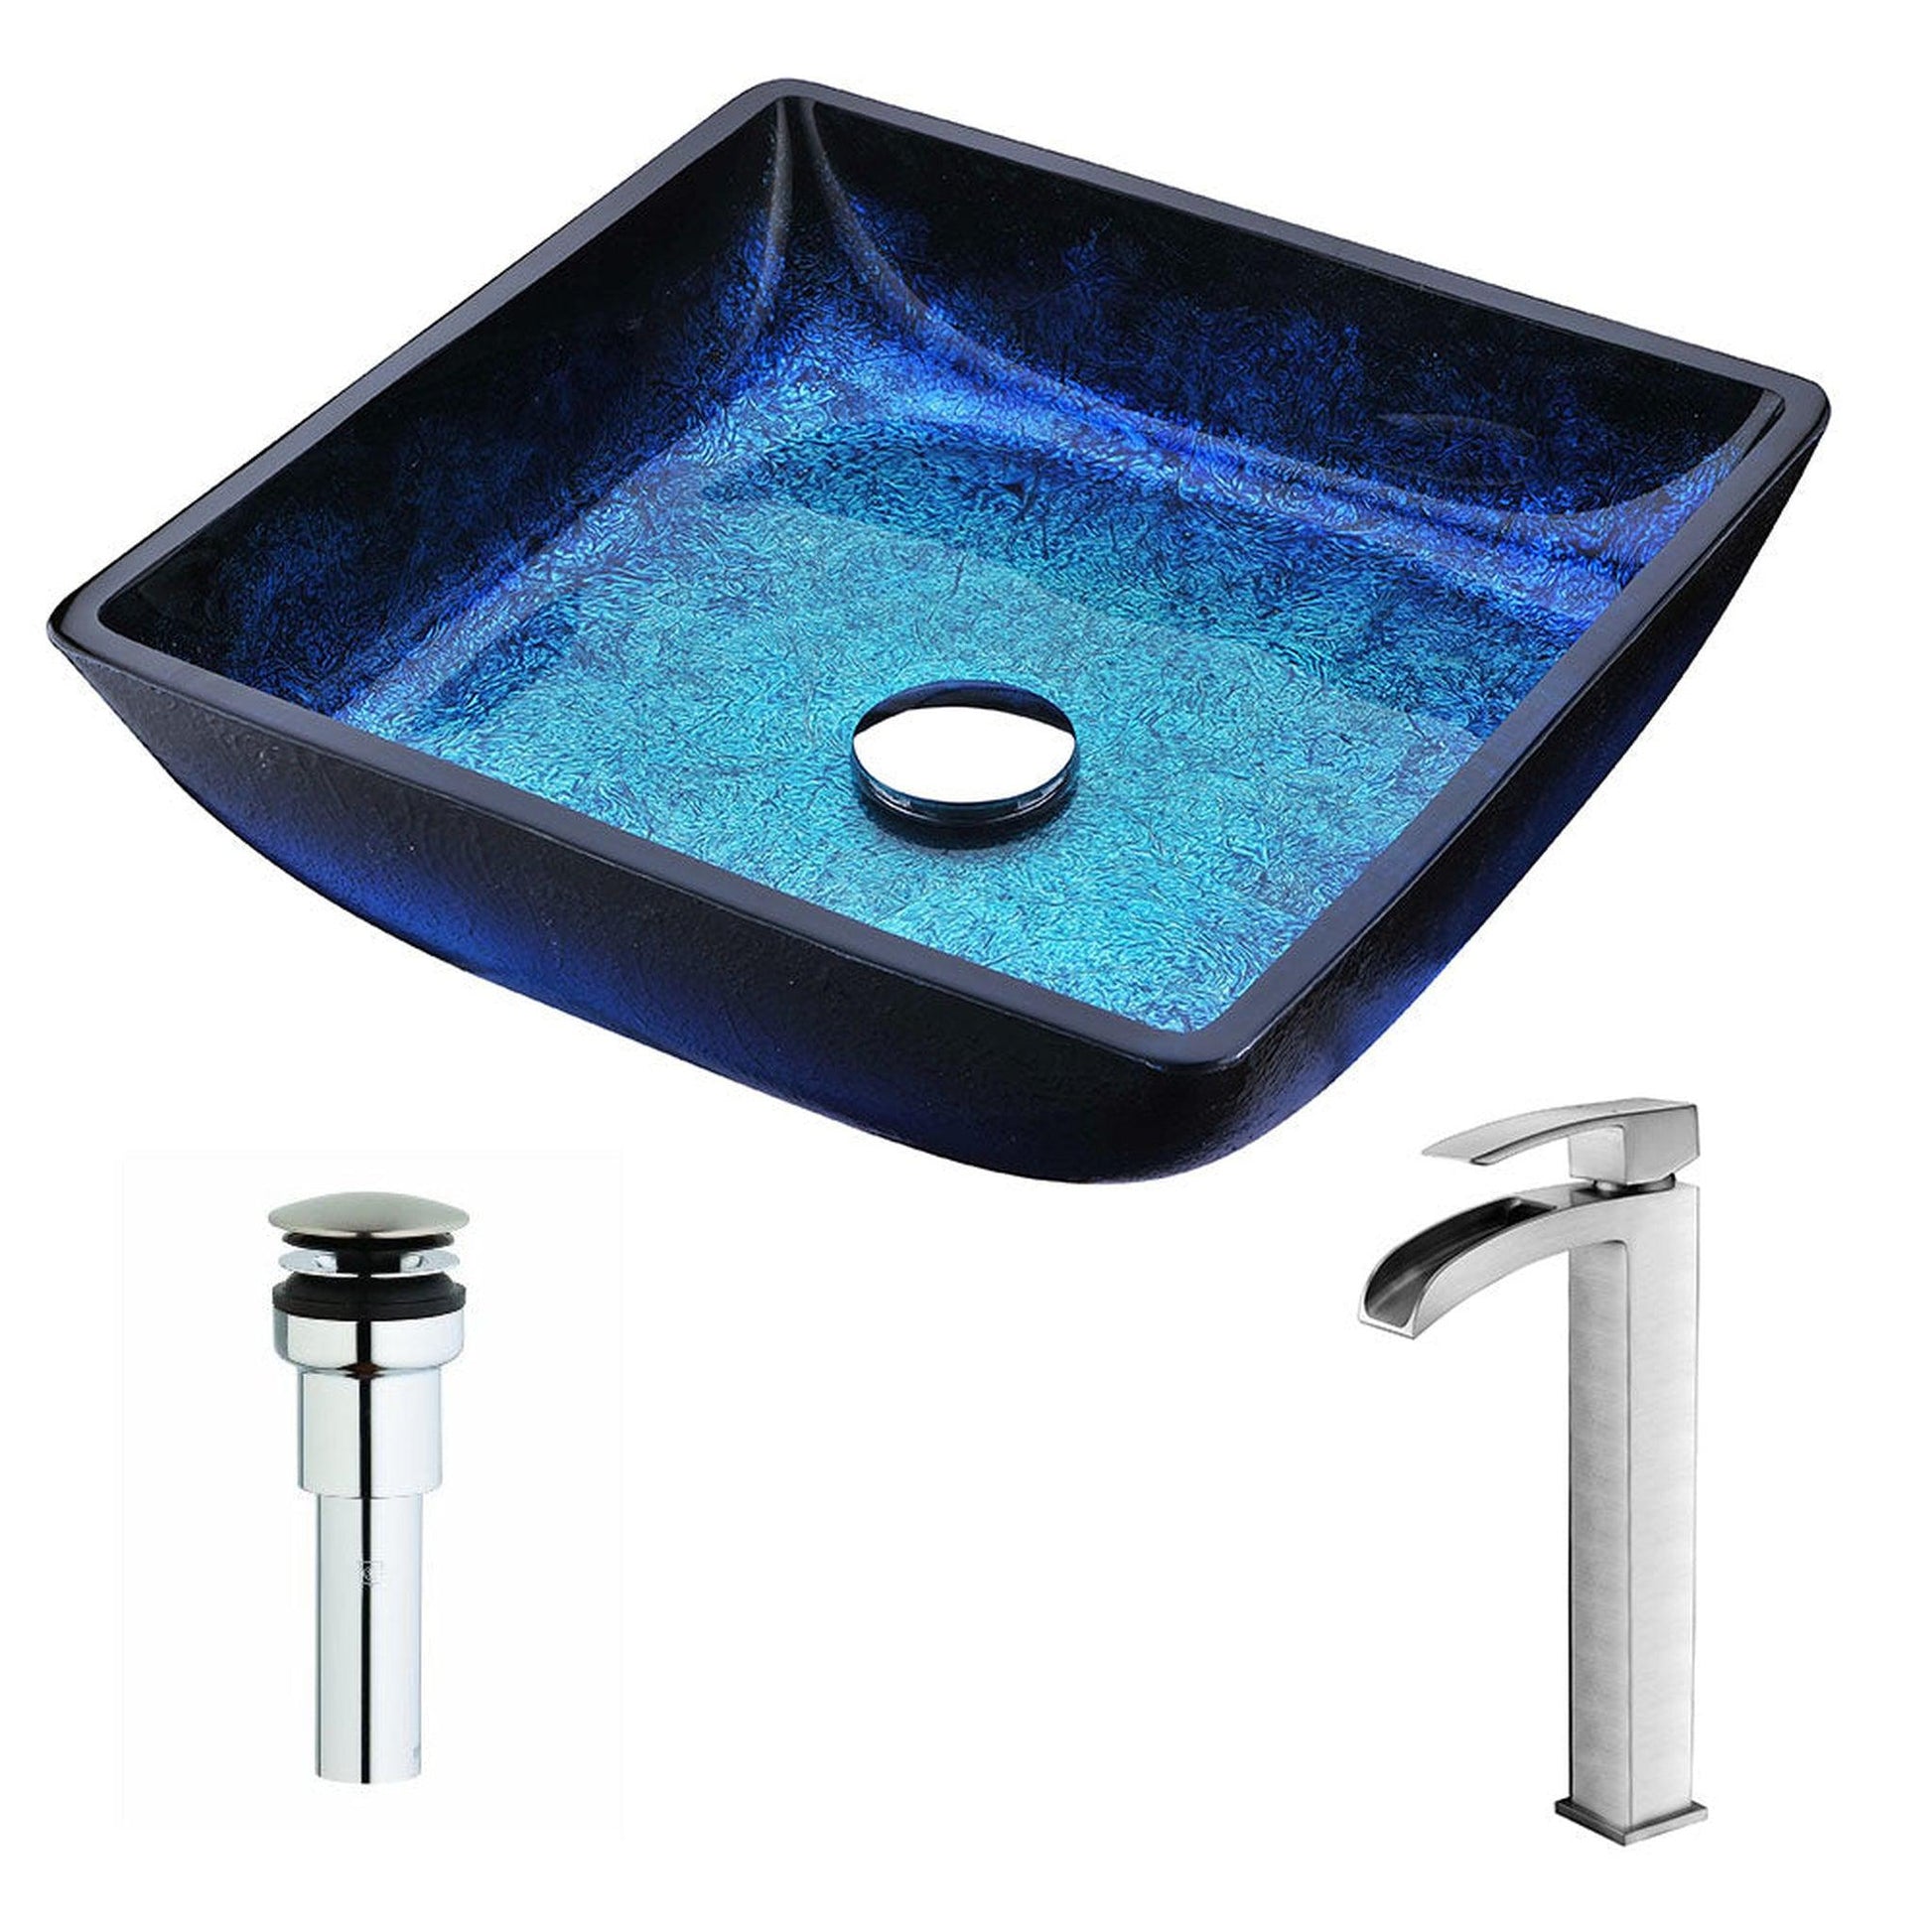 ANZZI Viace Series 15" x 15" Square Shaped Blazing Blue Deco-Glass Vessel Sink With Chrome Pop-Up Drain and Brushed Nickel Key Faucet